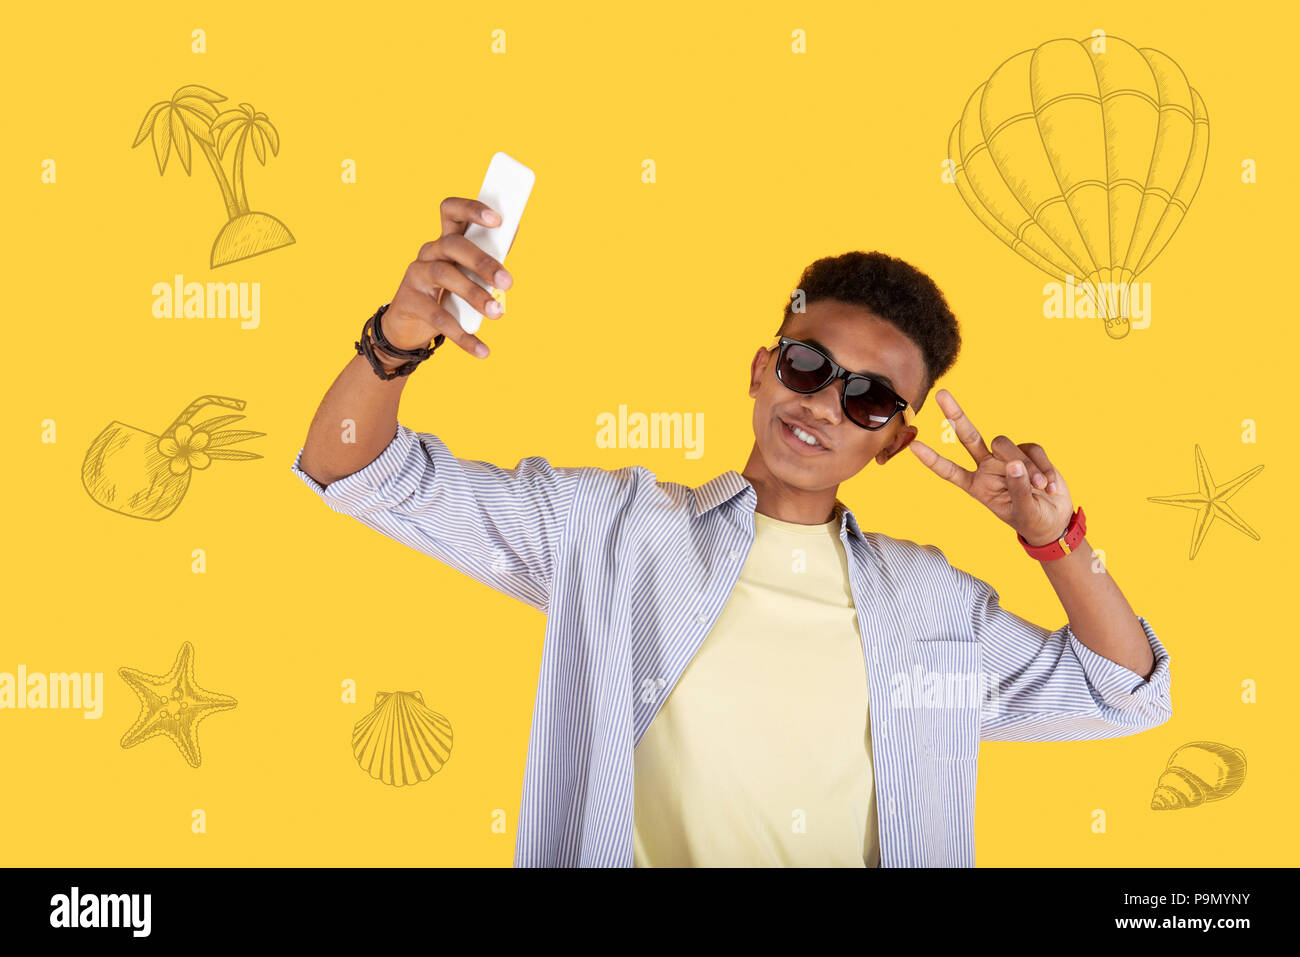 Cheerful student putting his hand up while taking a selfie Stock Photo